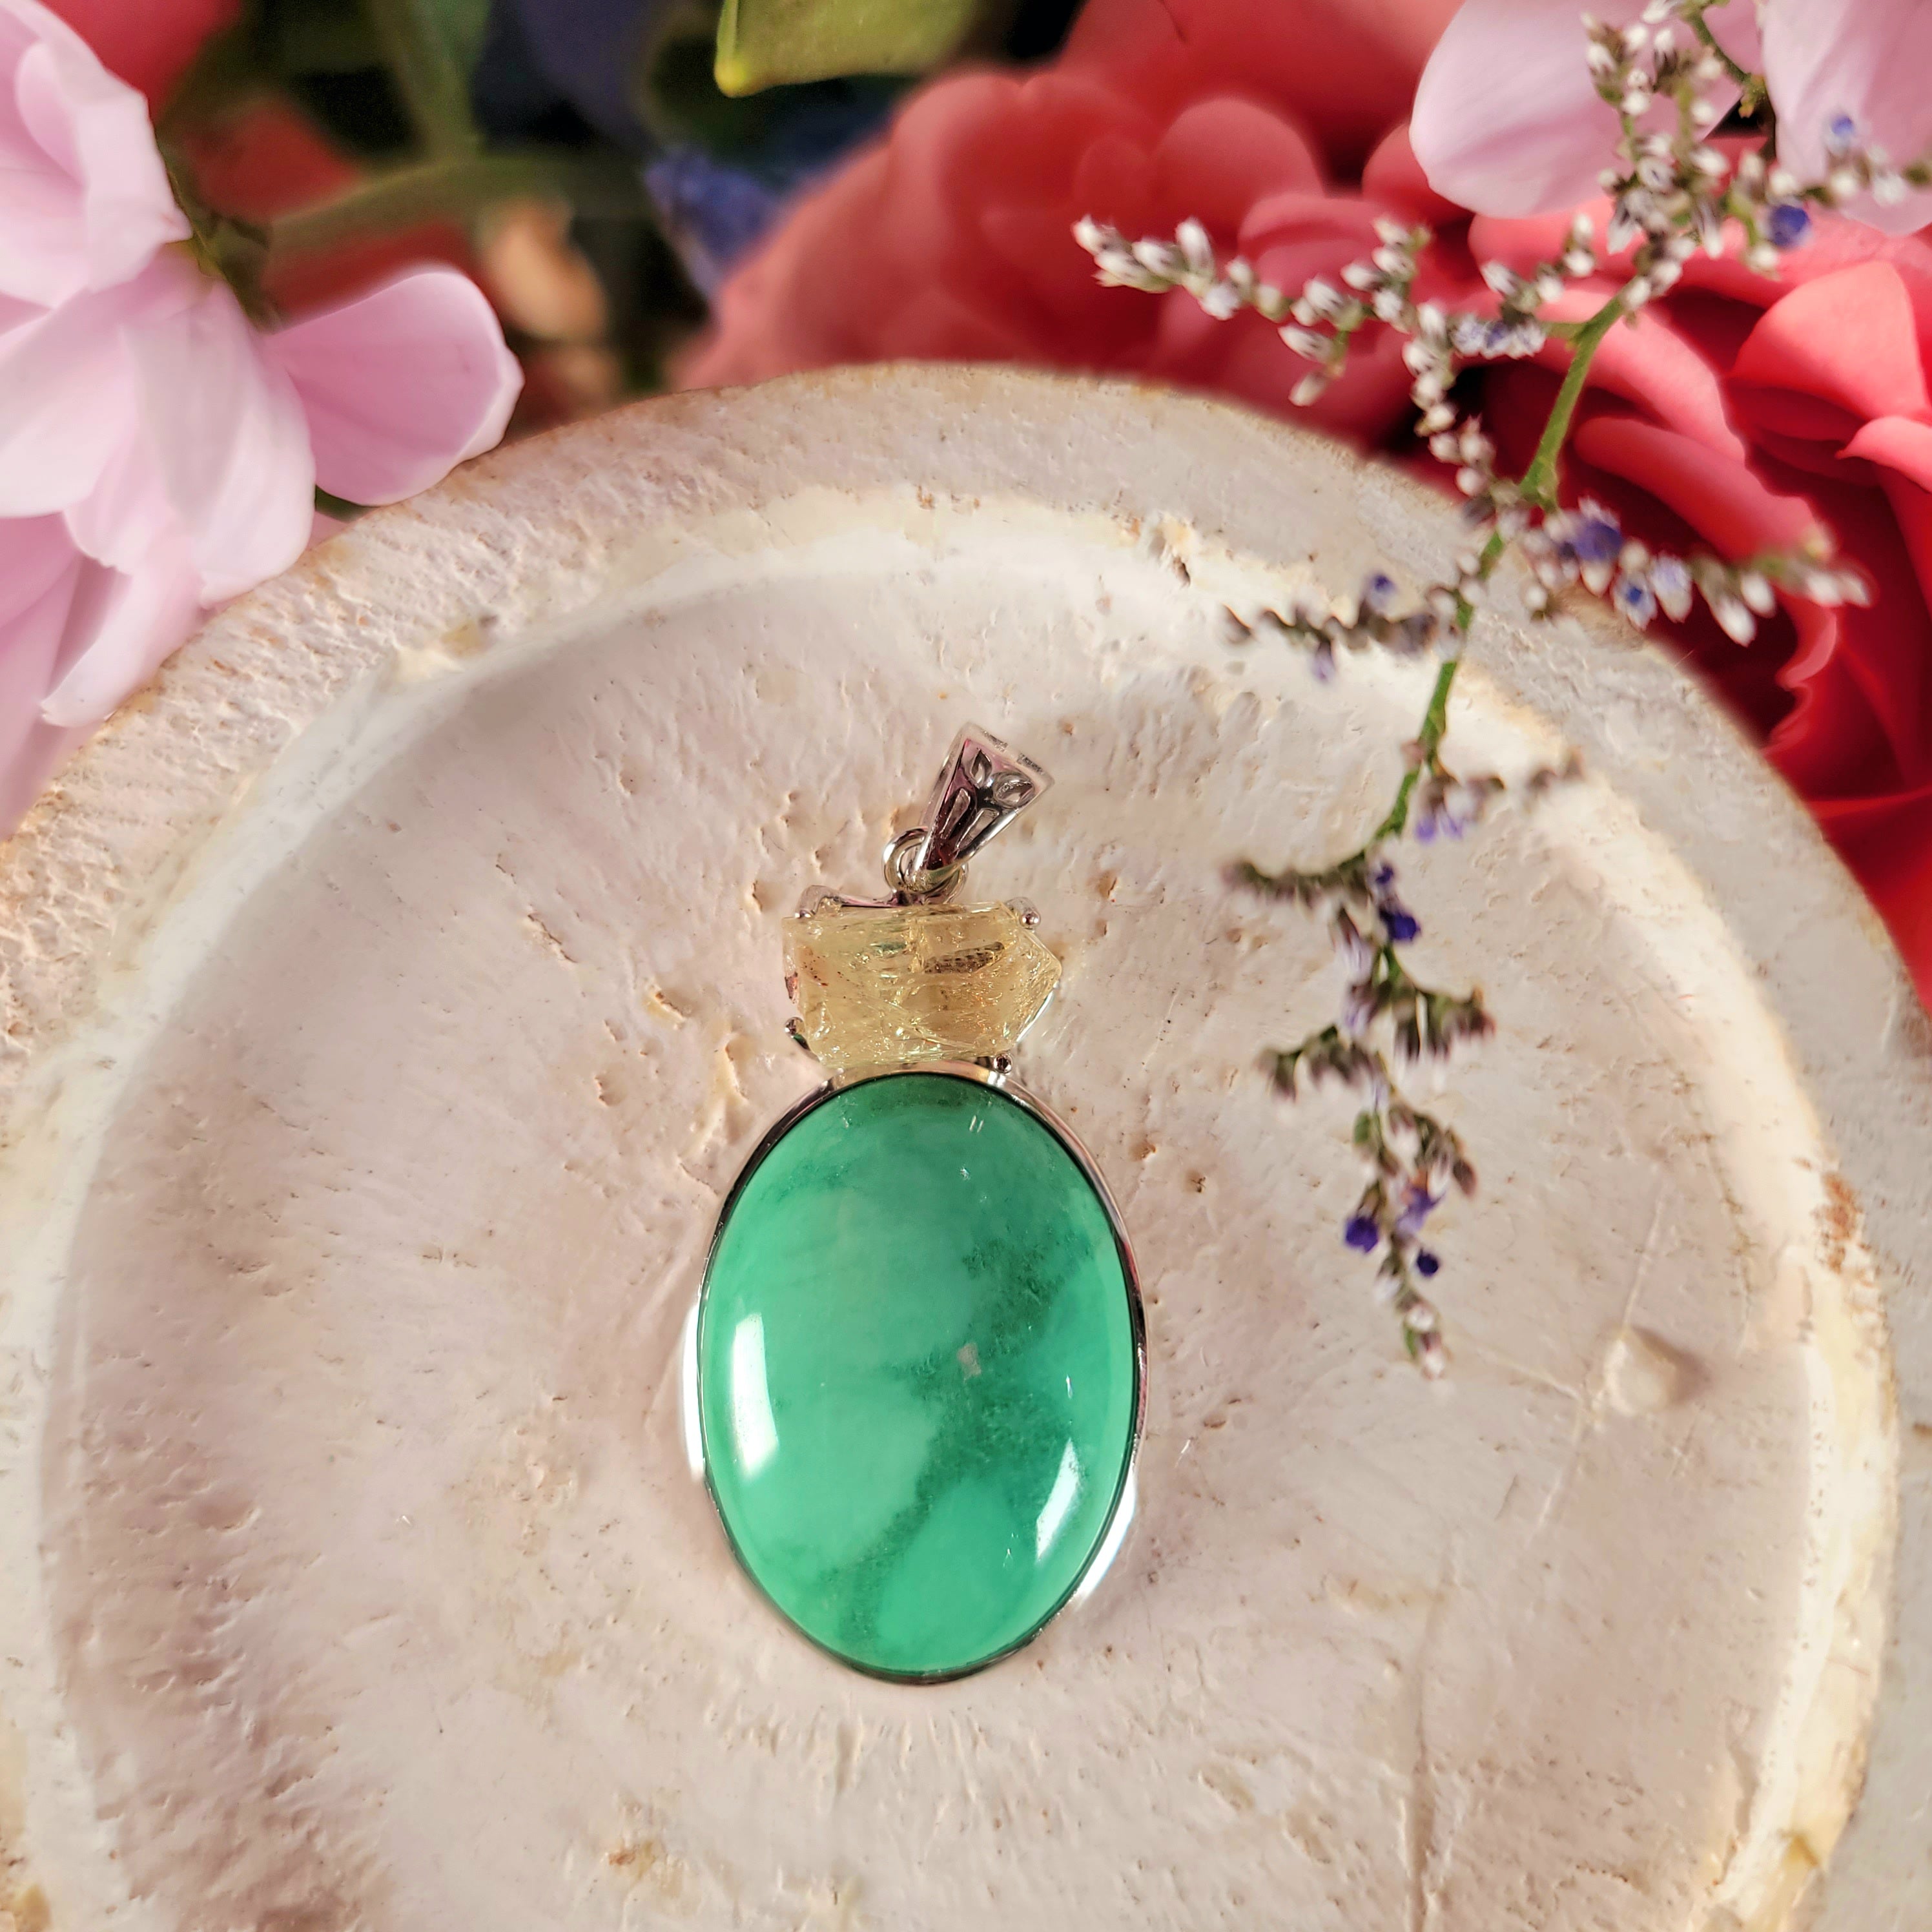 Variscite x Golden Yellow Apatite Pendant .925 Silver for Emotional Healing, Joy, Love and Prosperity